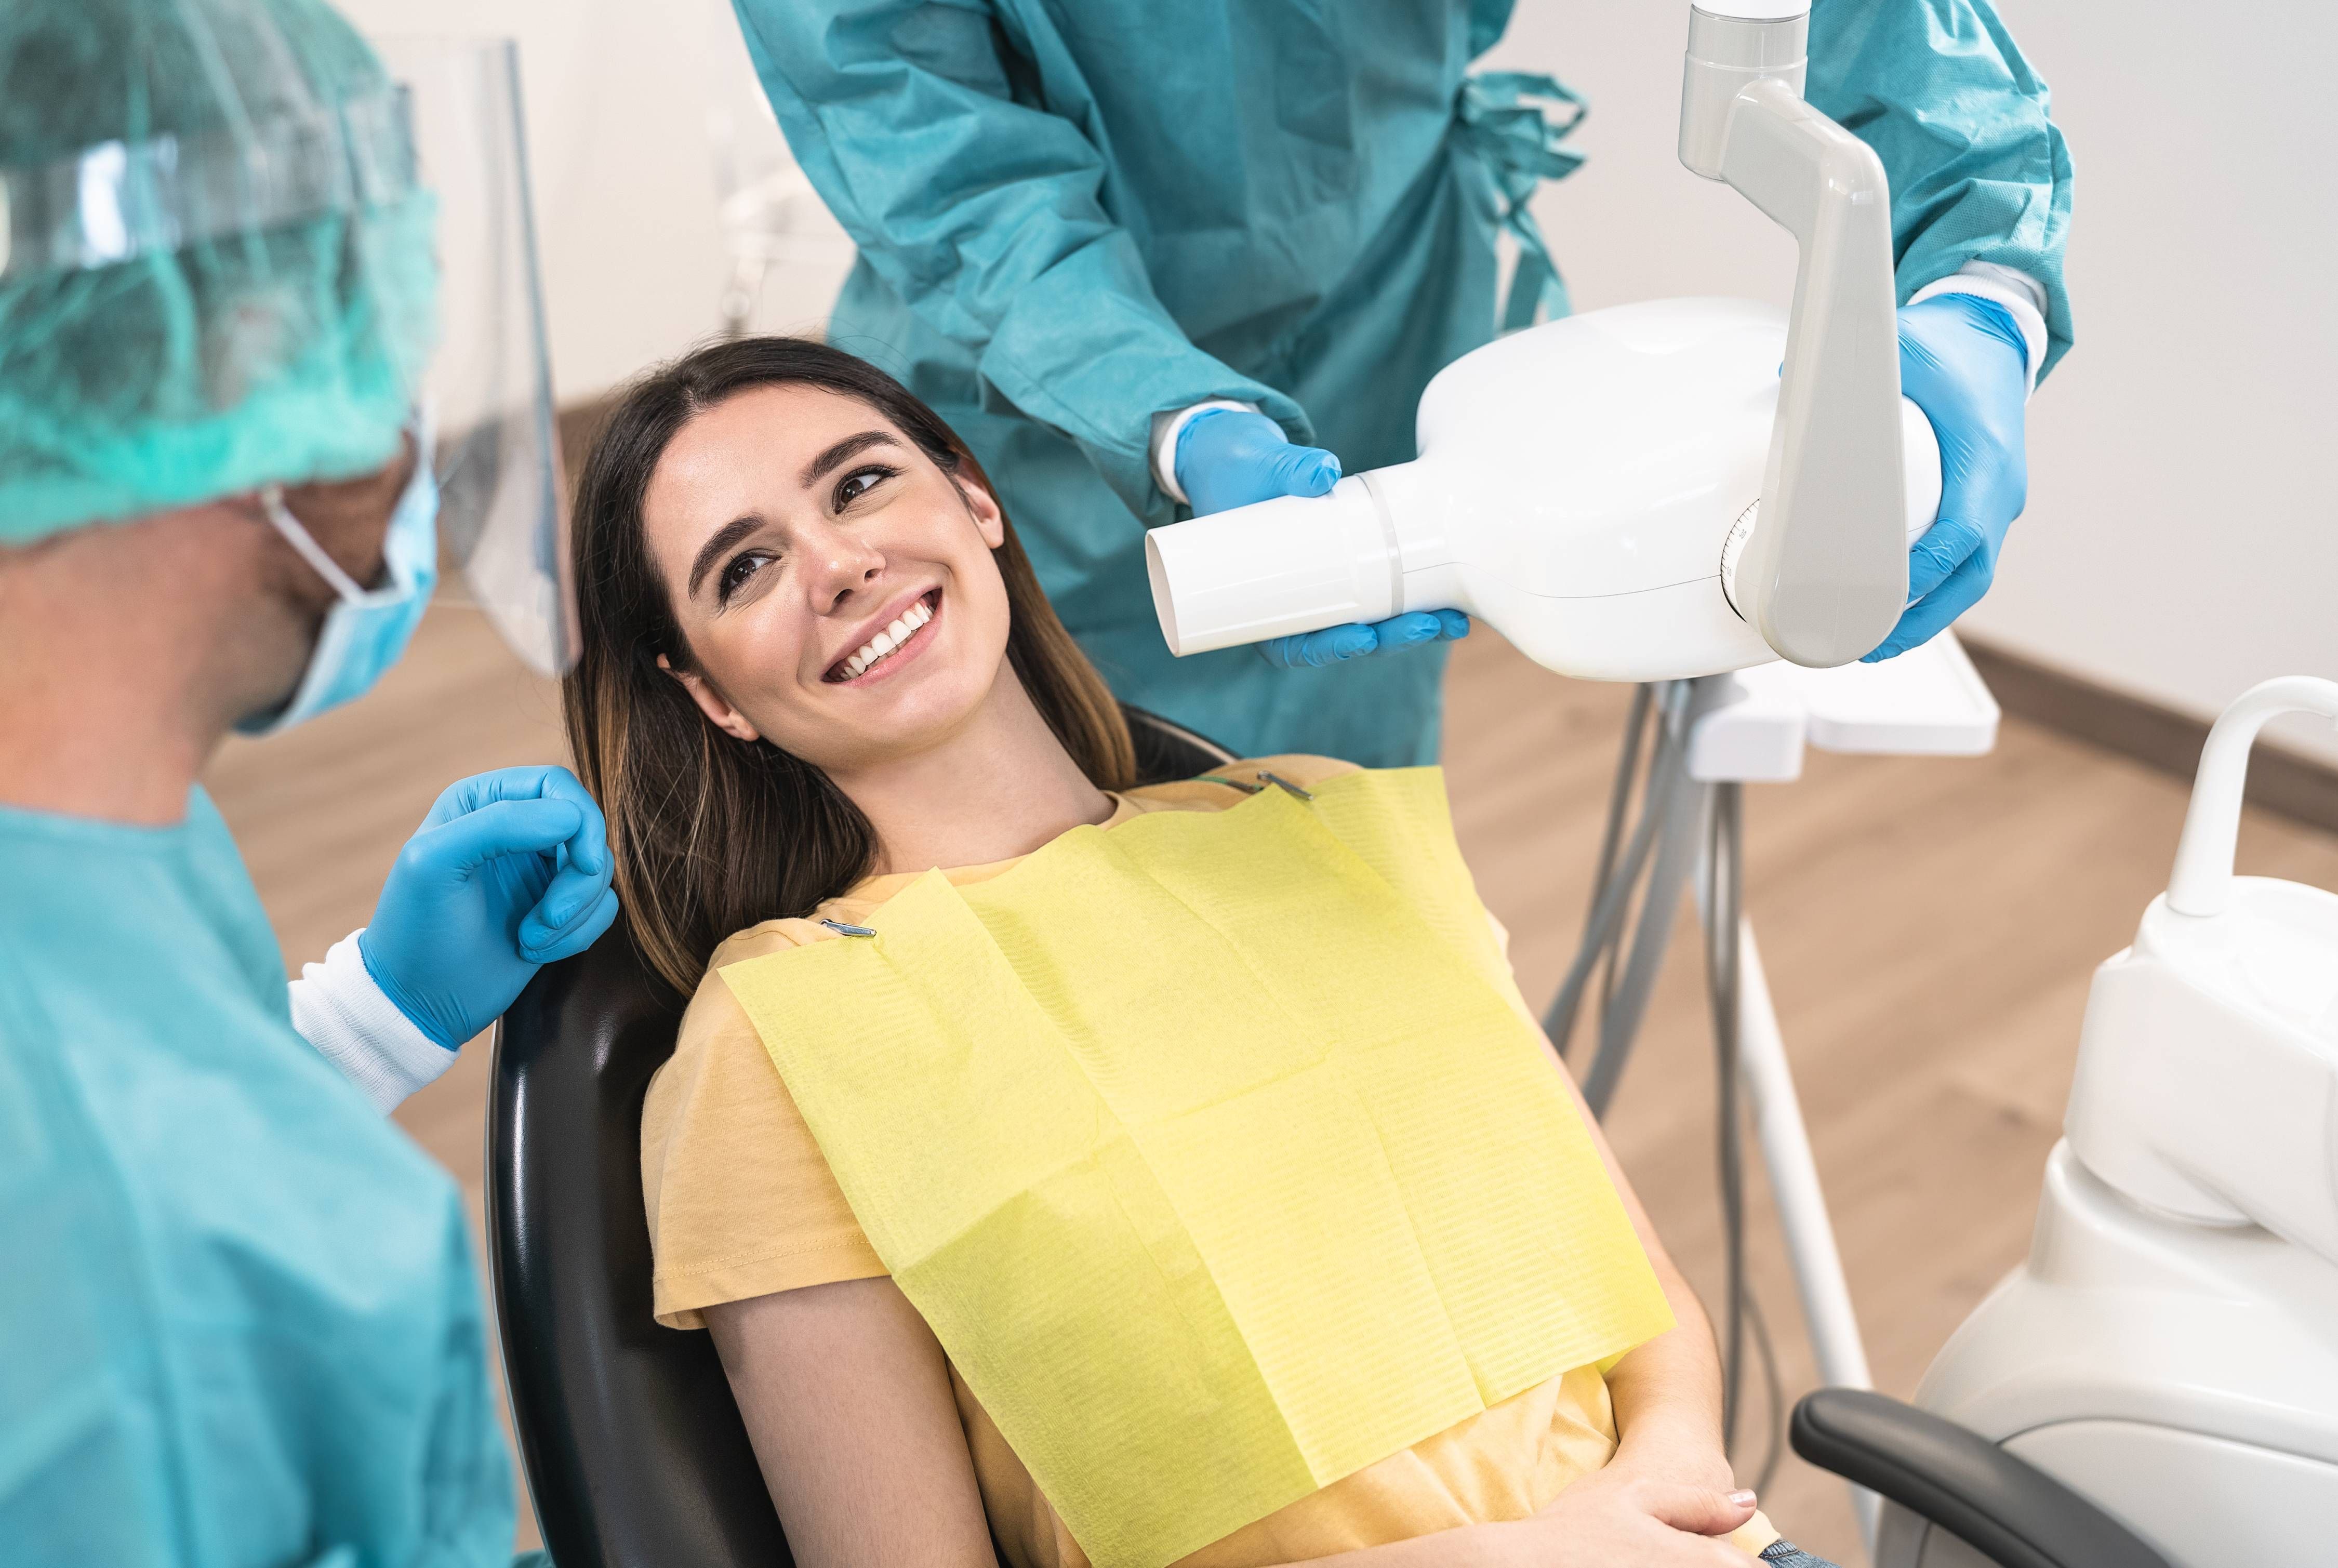 How To Find The Right Dentist For Me?